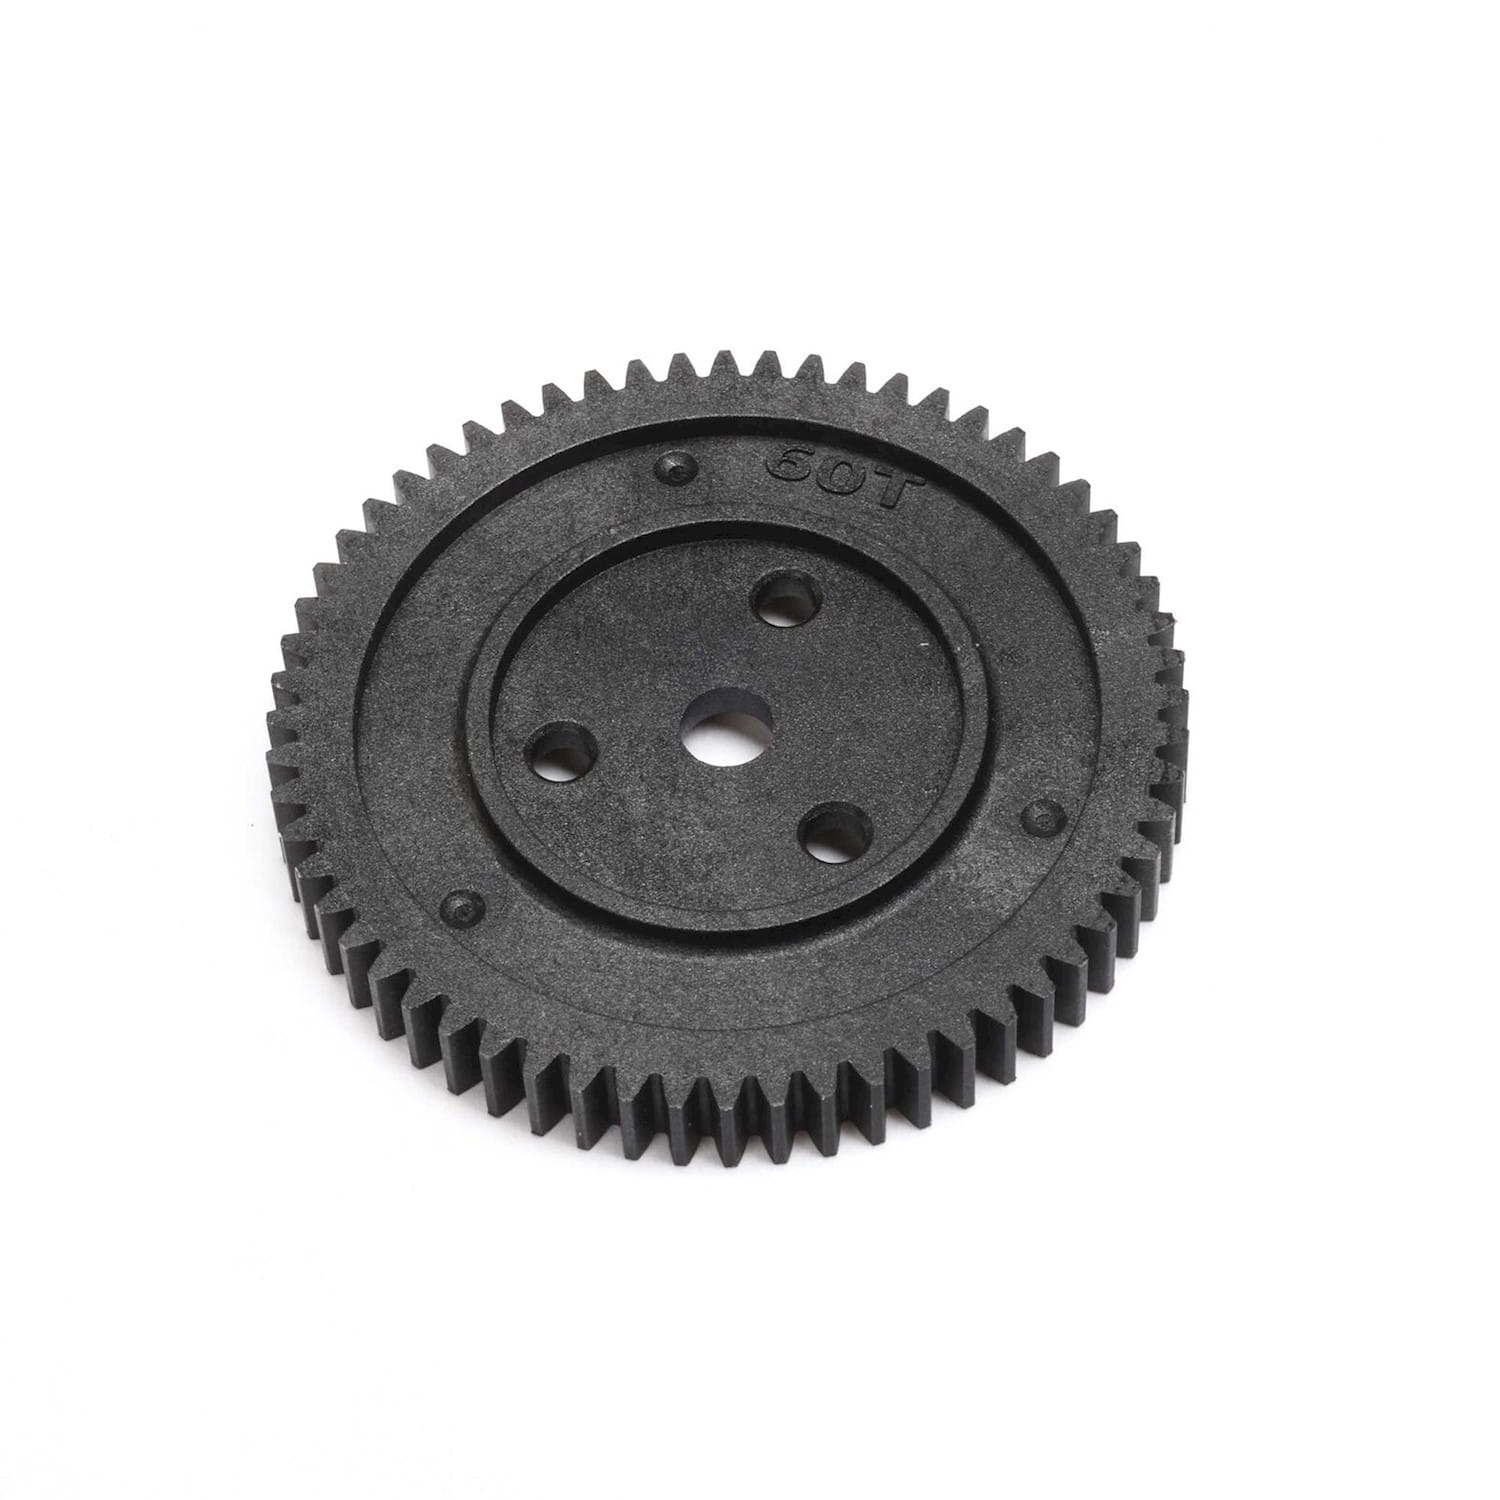 Axial Spur Gear, 60T 32P: PRO